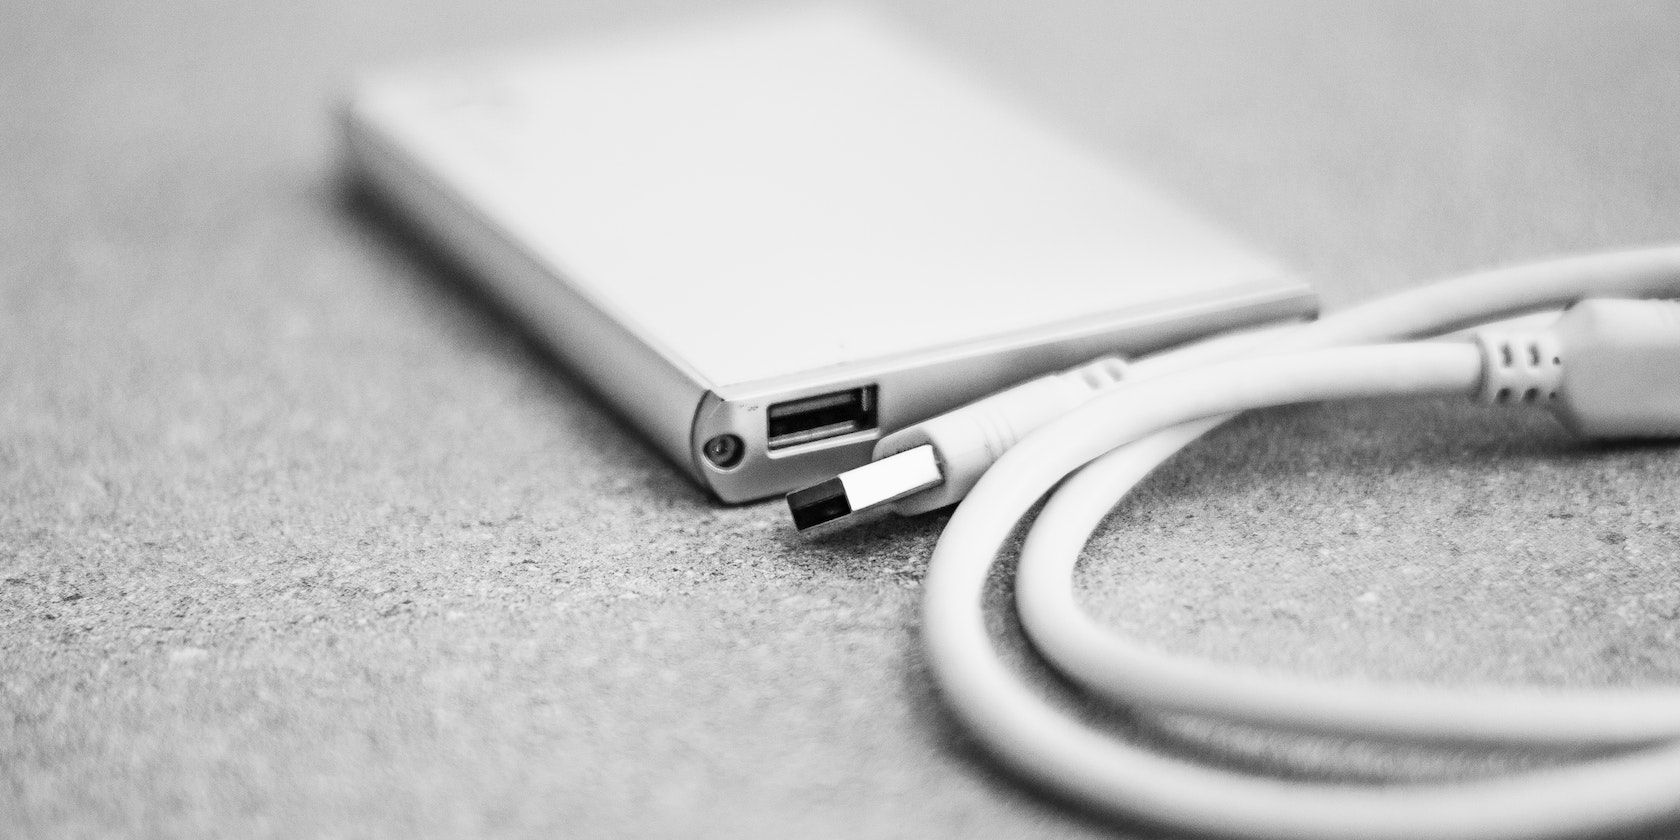 Close-up of a hard drive and a USB cord